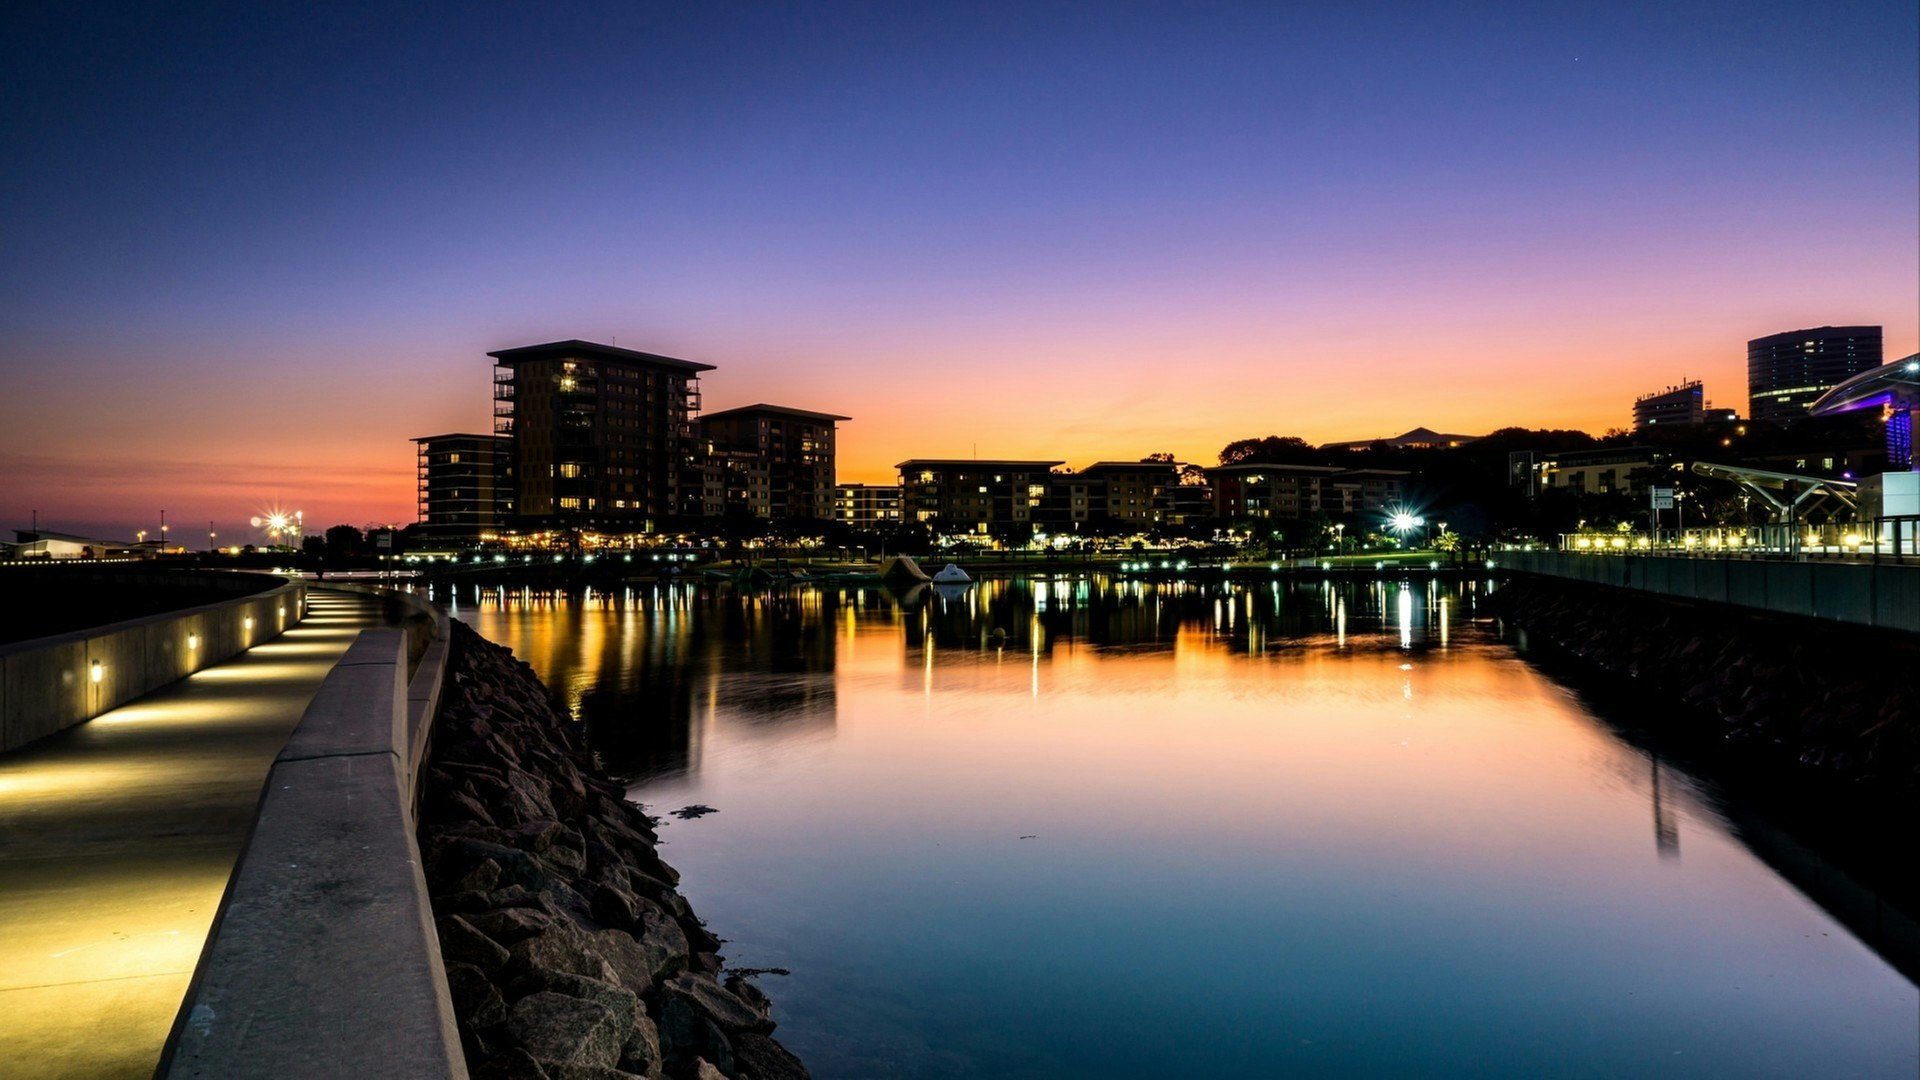 Sunset at the Waterfront in Darwin Northern Territory Australia with illuminated path and night lighting.